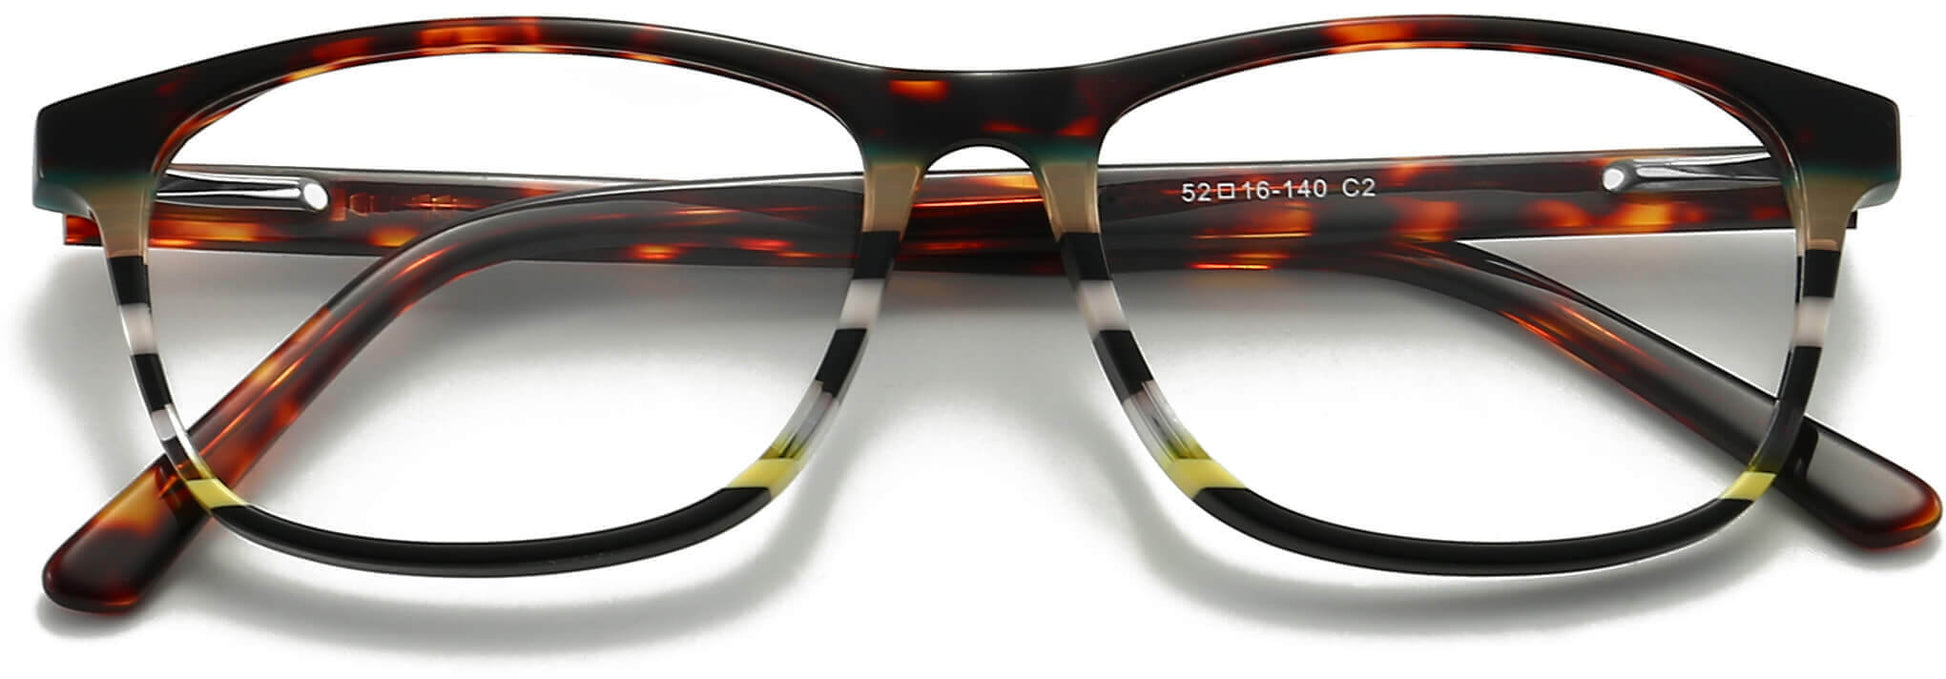 griffin acetate rectangle red tortoise Eyeglasses from ANRRI, closed view